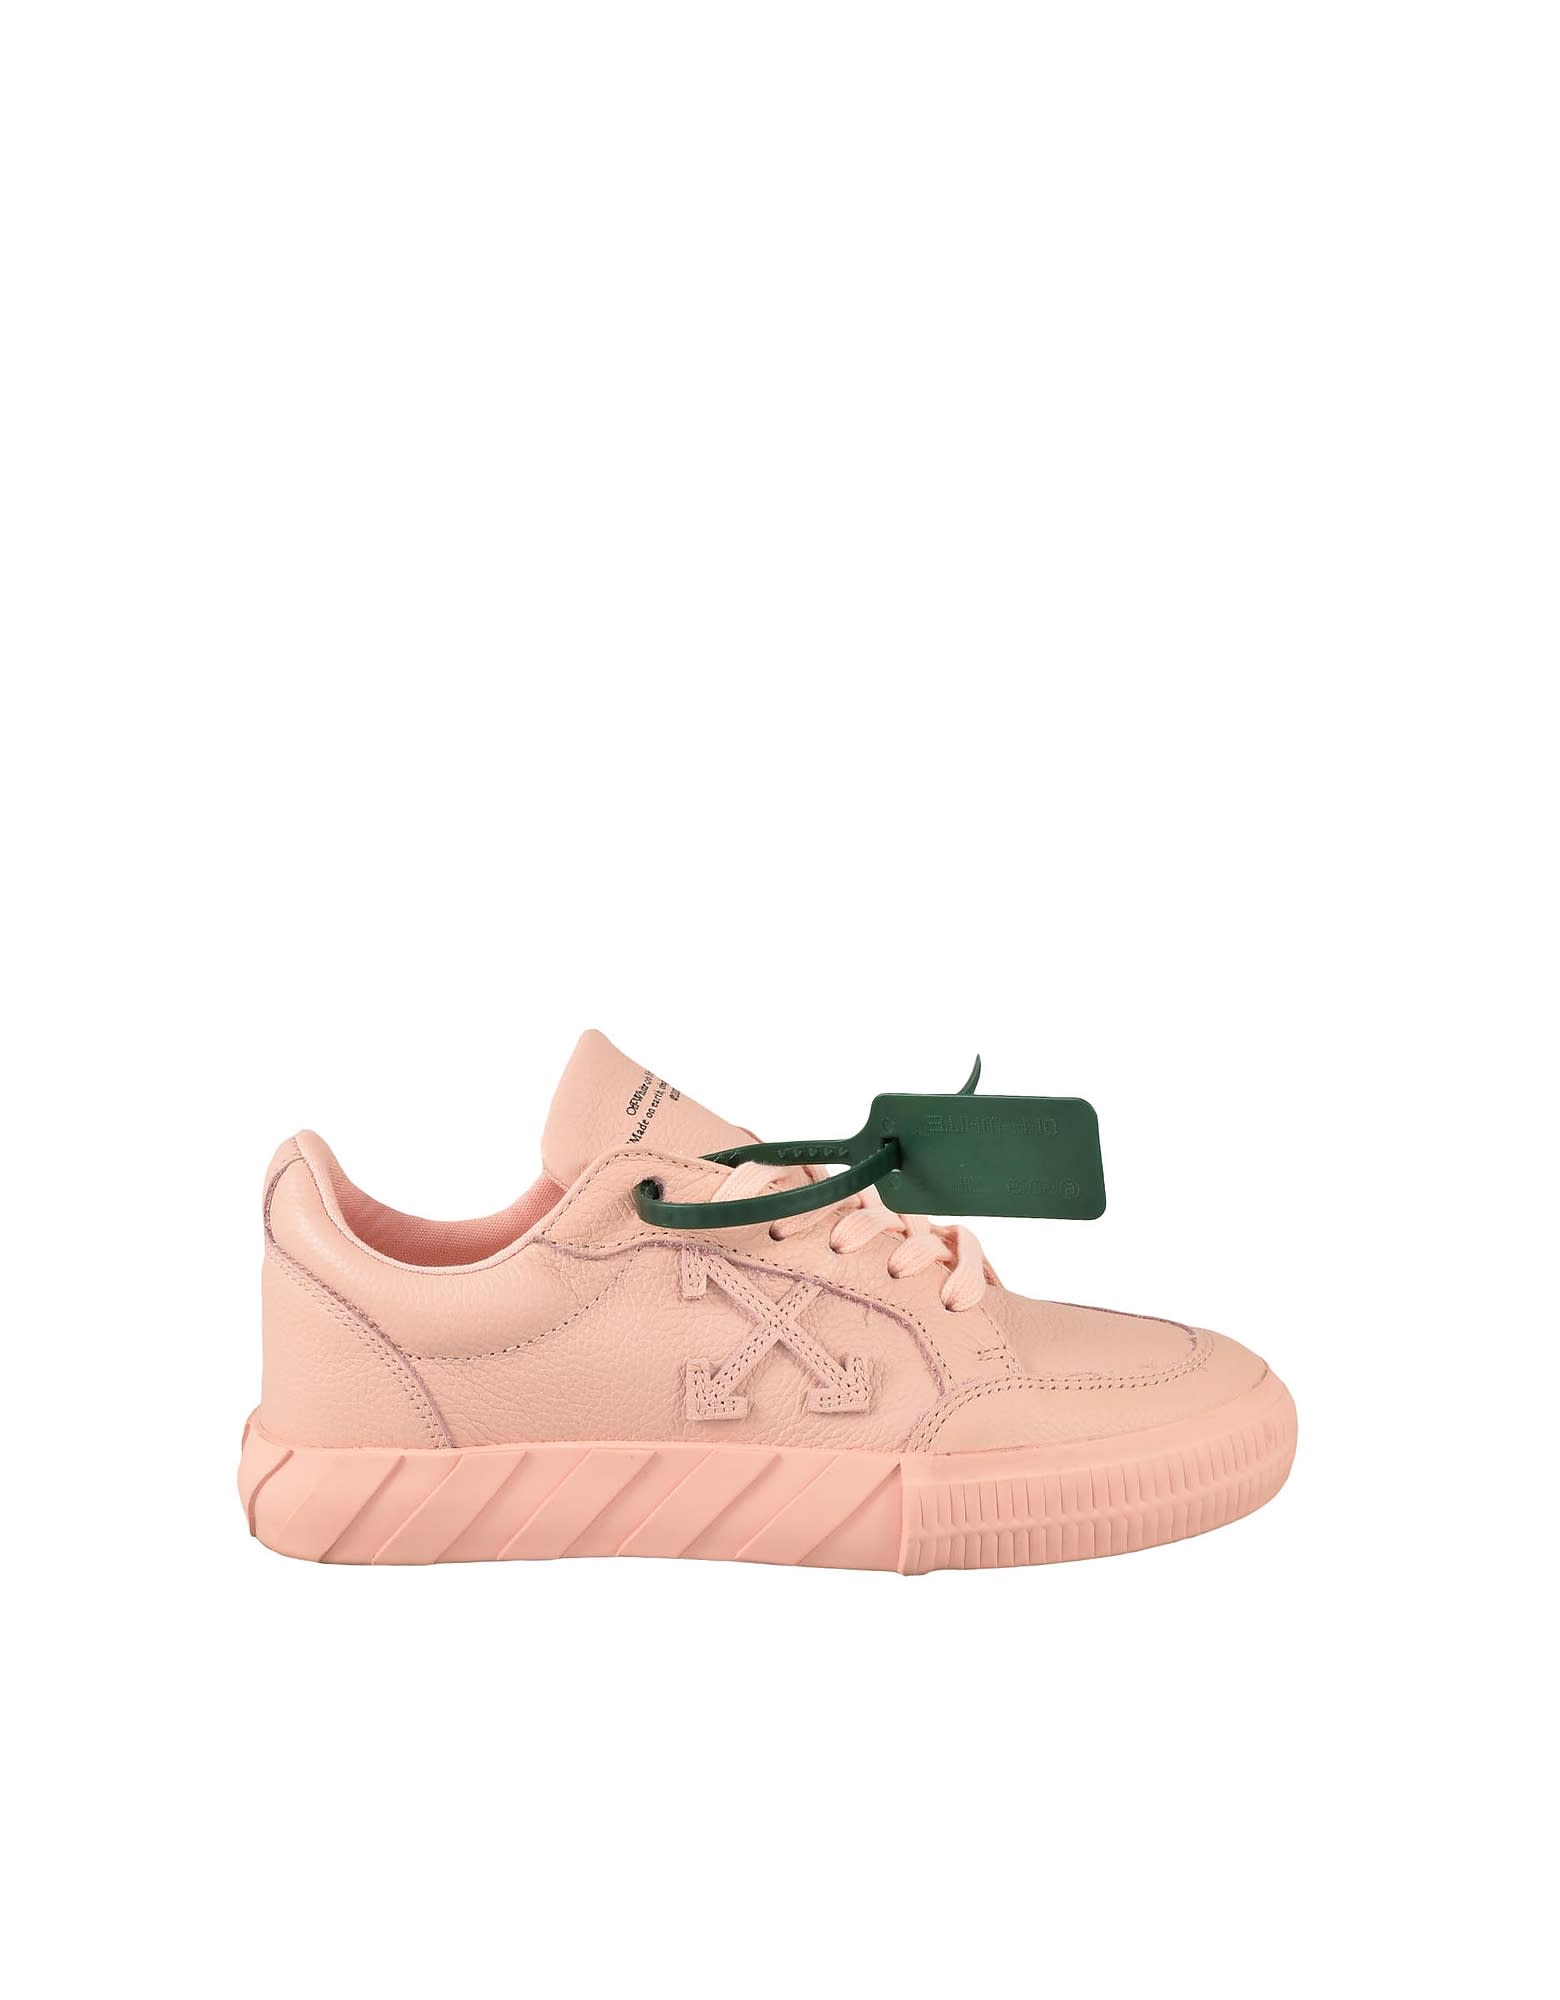 OFF-WHITE WOMENS PINK SNEAKERS